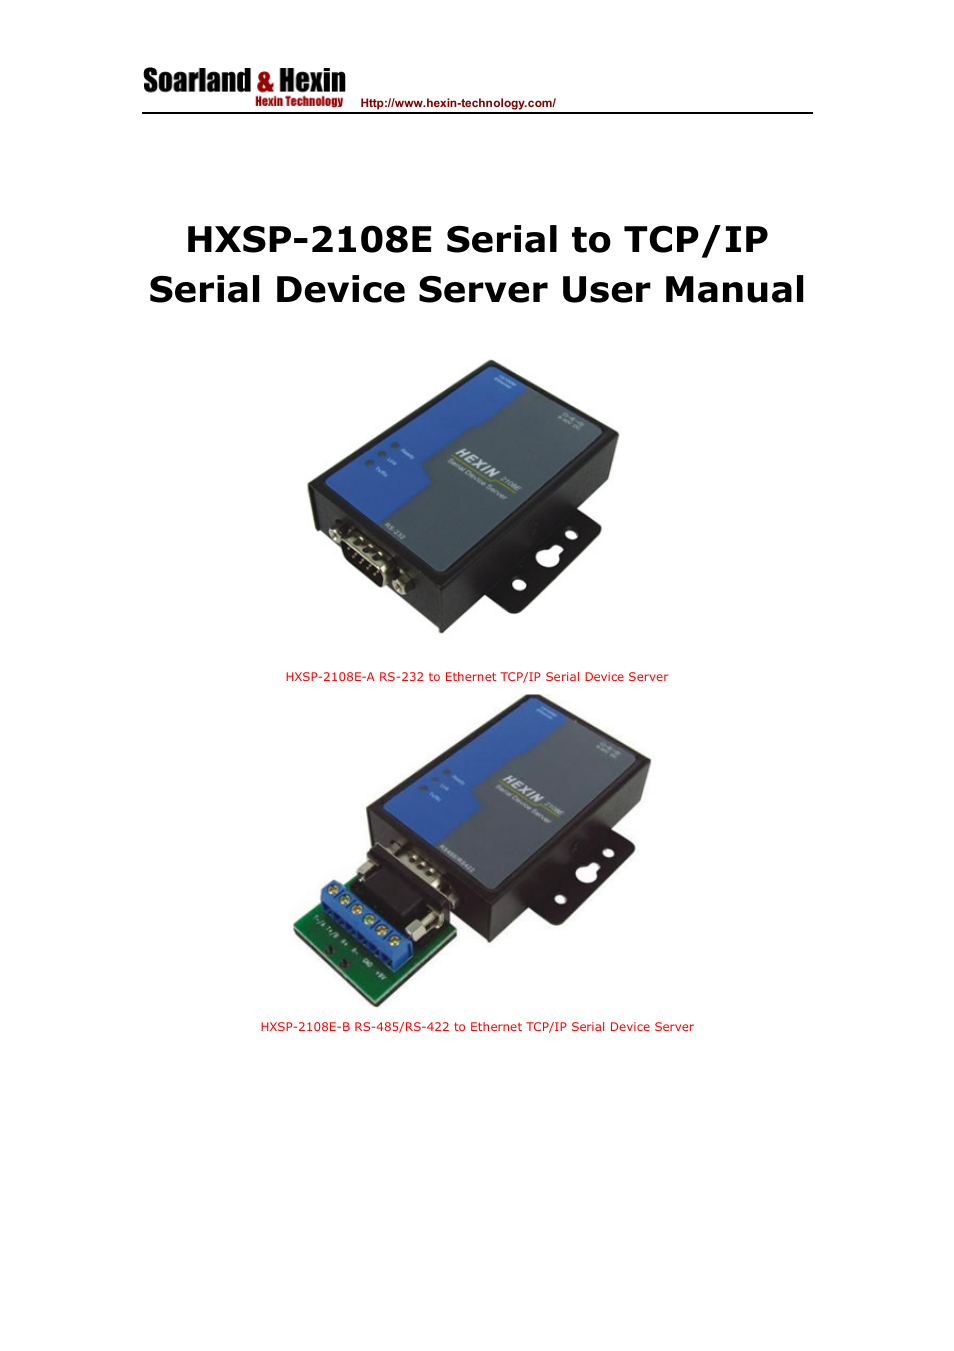 HXSP-2108E-B RS-485/RS-422 To Ethernet TCP/IP Serial Device Server